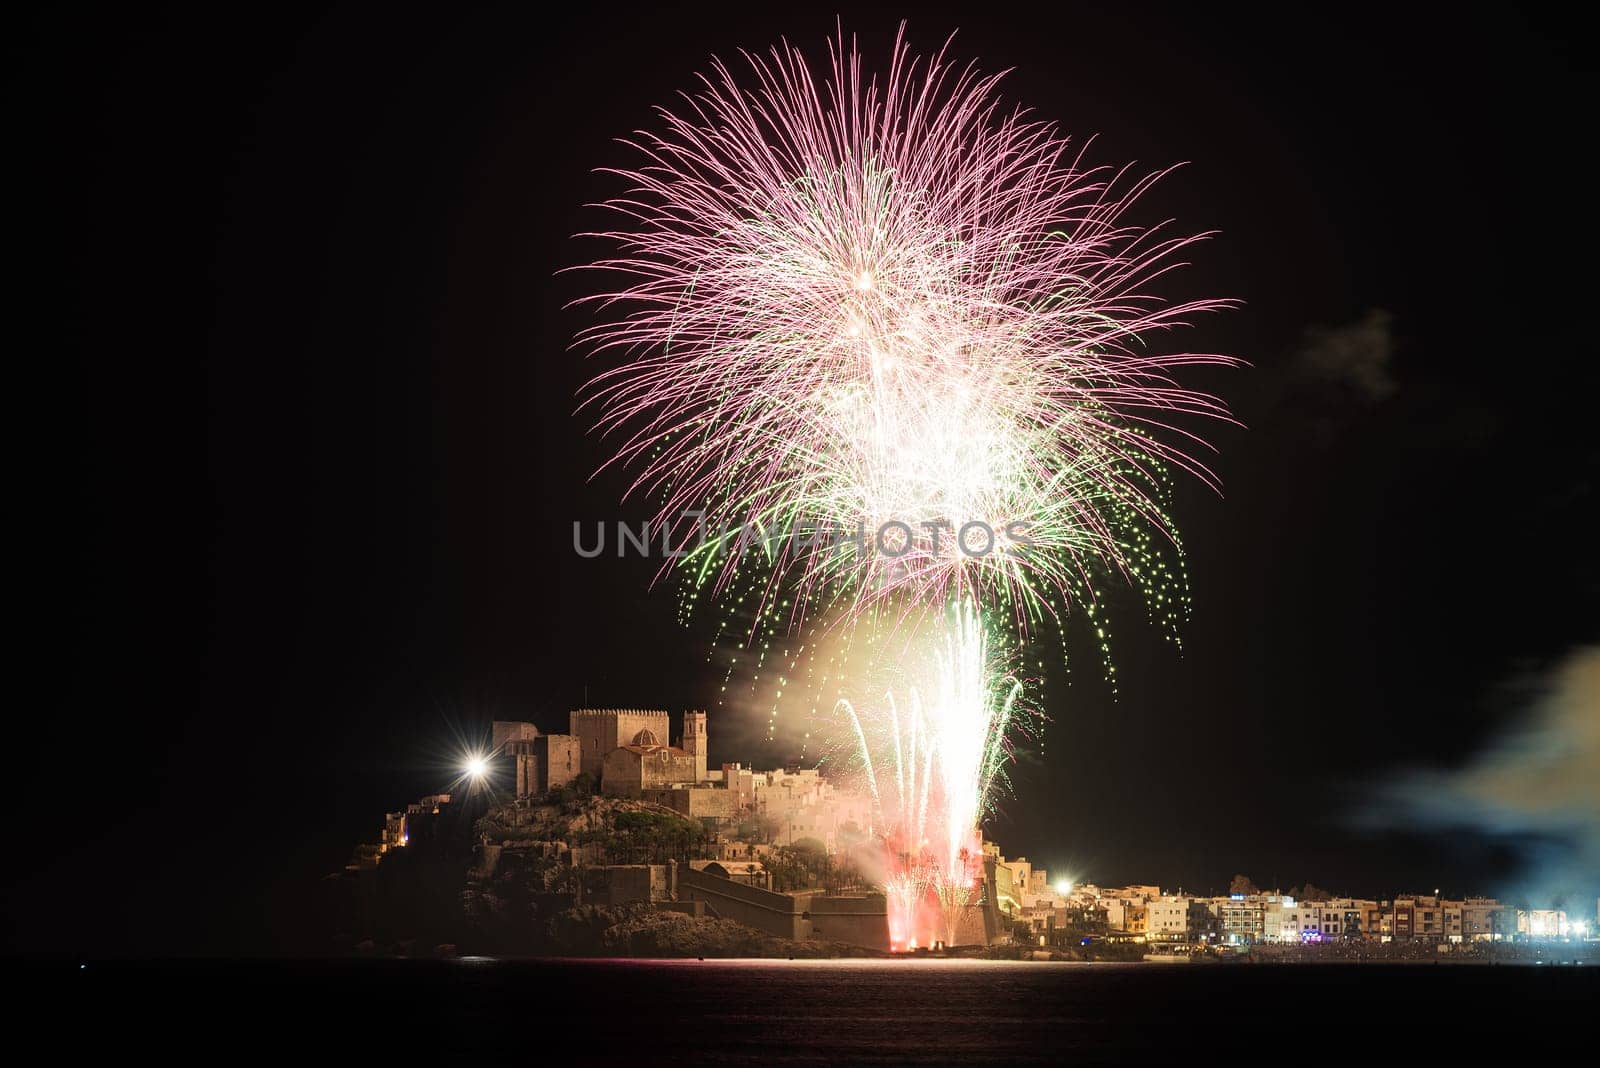 Nocturnal Fiesta: Peniscola Castle Fireworks Spectacle by raul_ruiz